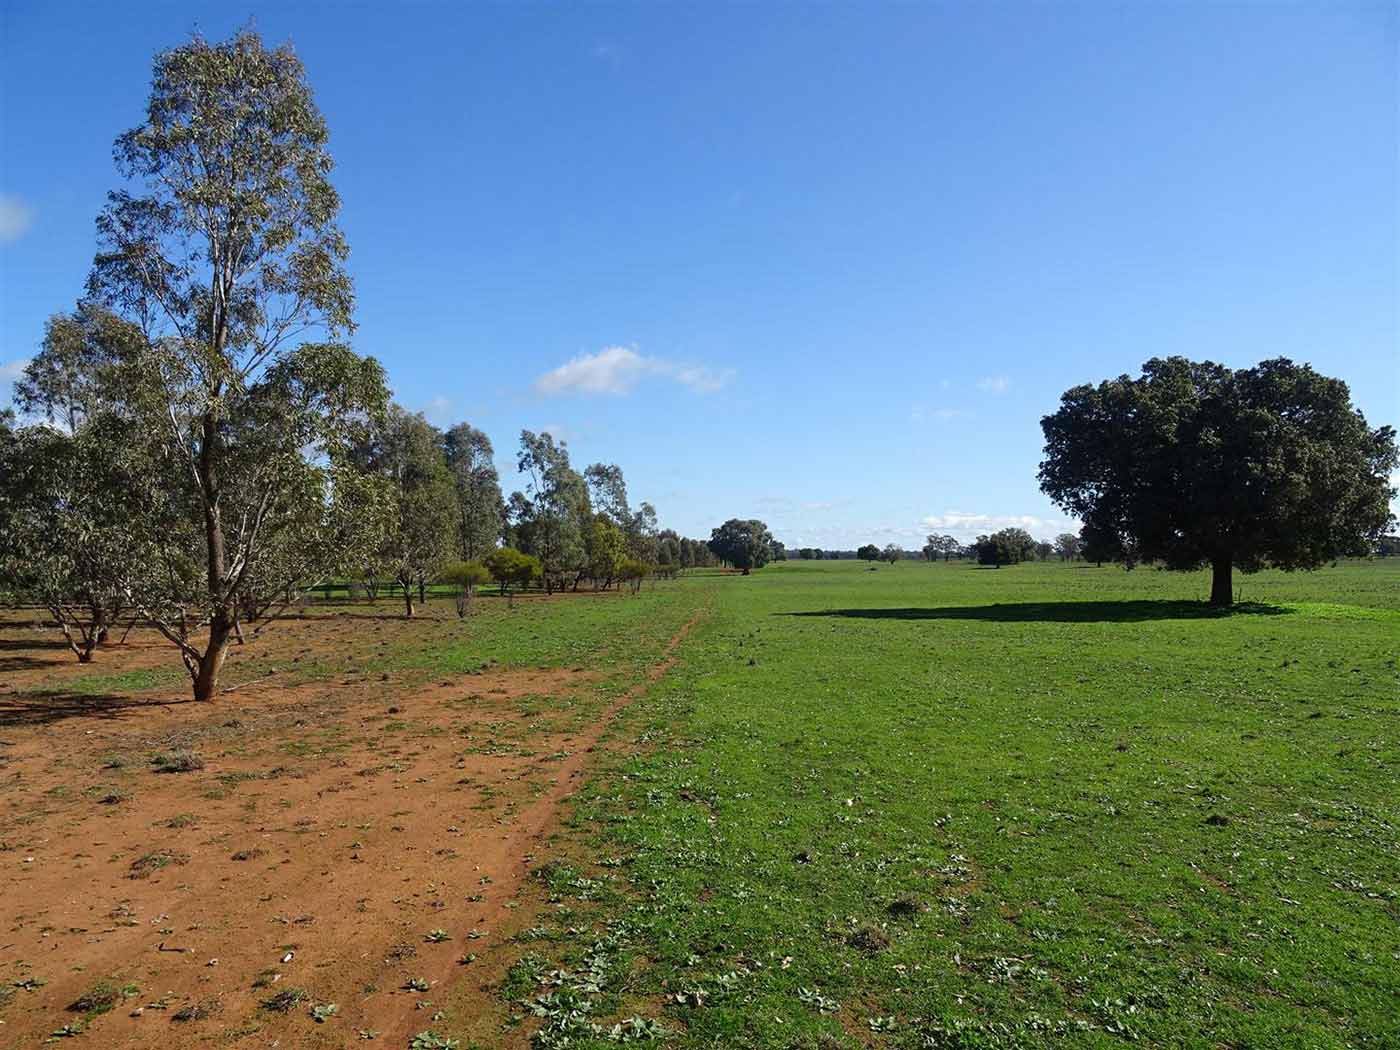 A view of a grassy paddock lined with young trees.